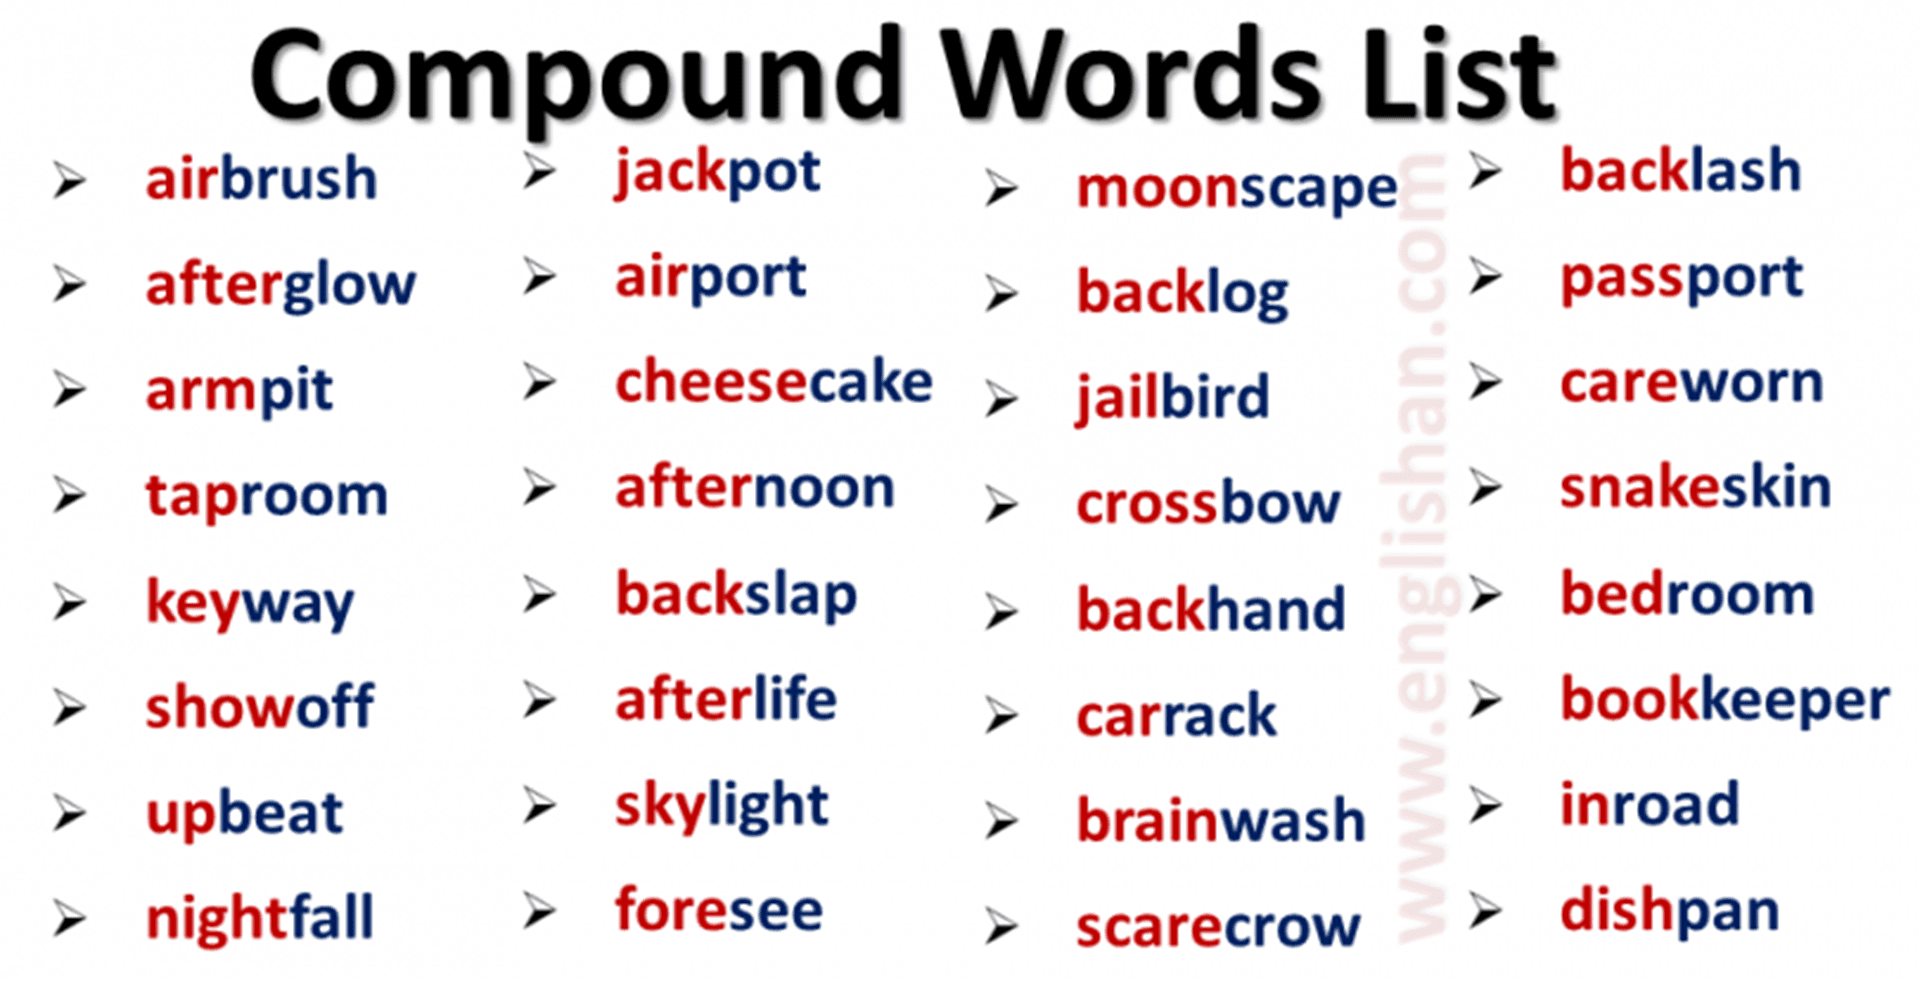 10-example-of-compound-words-in-english-types-of-compound-words-table